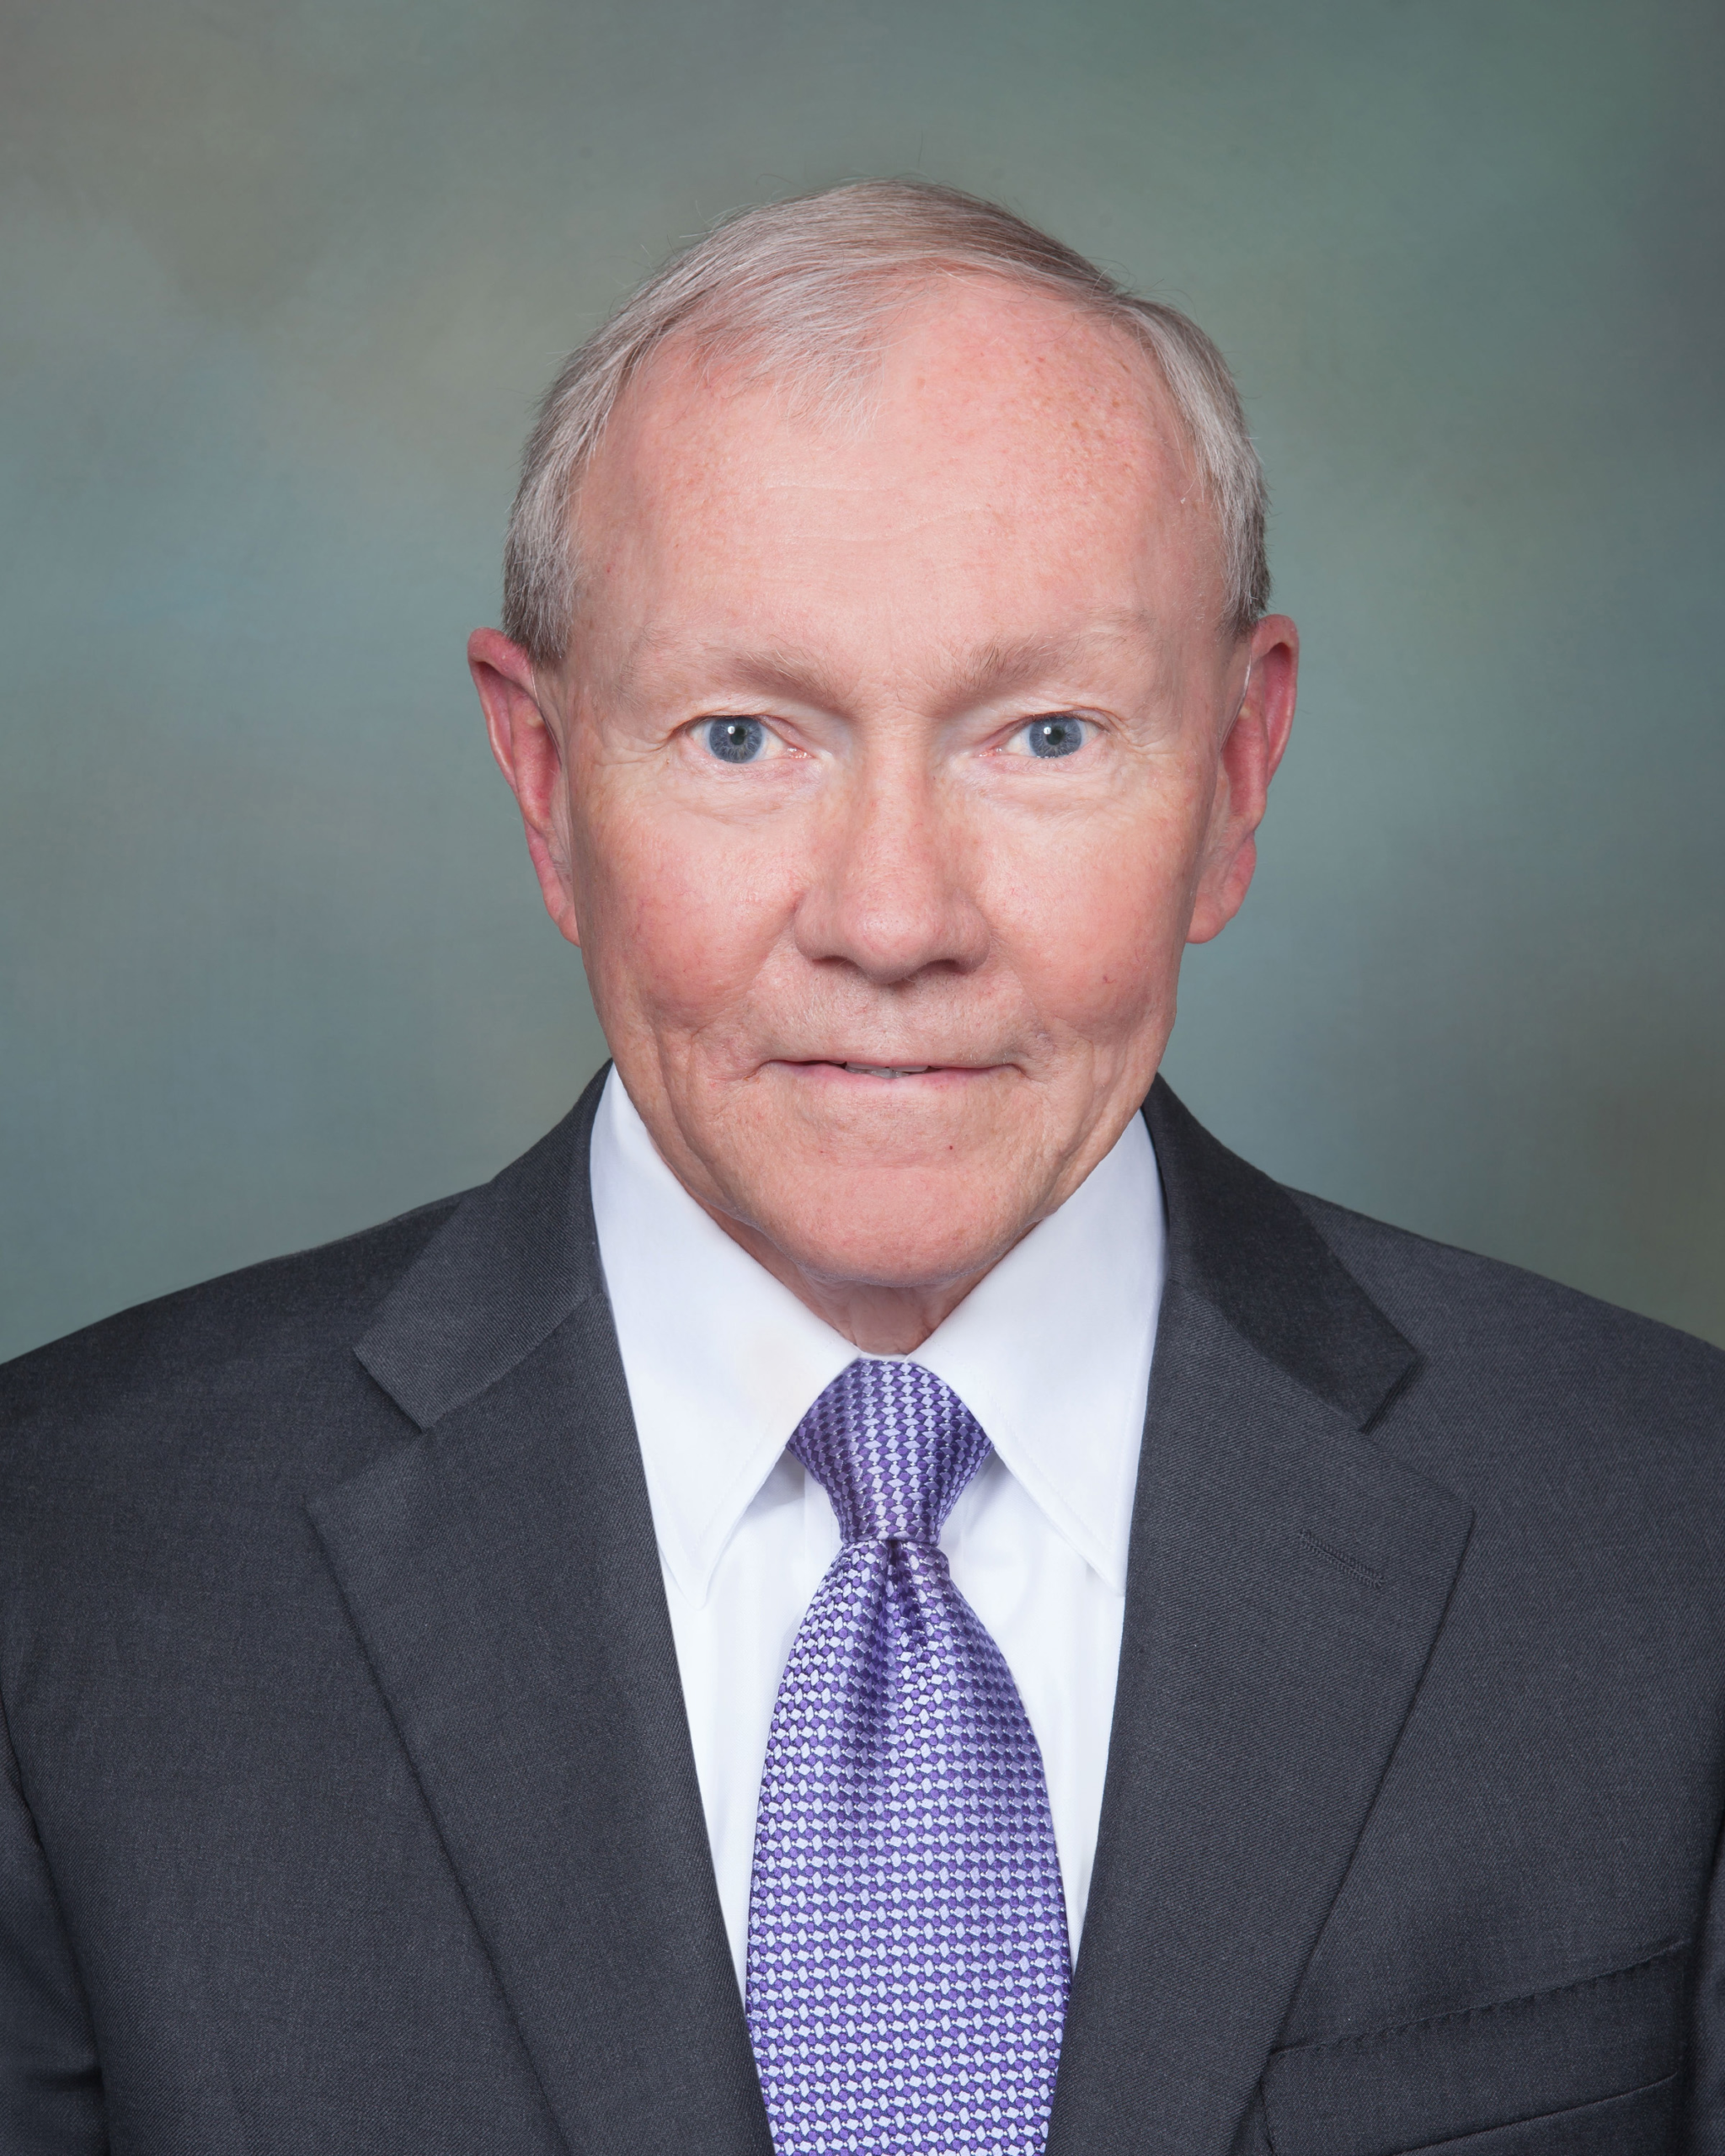 Gen. Martin E. Dempsey, U.S. Army, Retired, Former Chairman of the Joint Chiefs of Staff